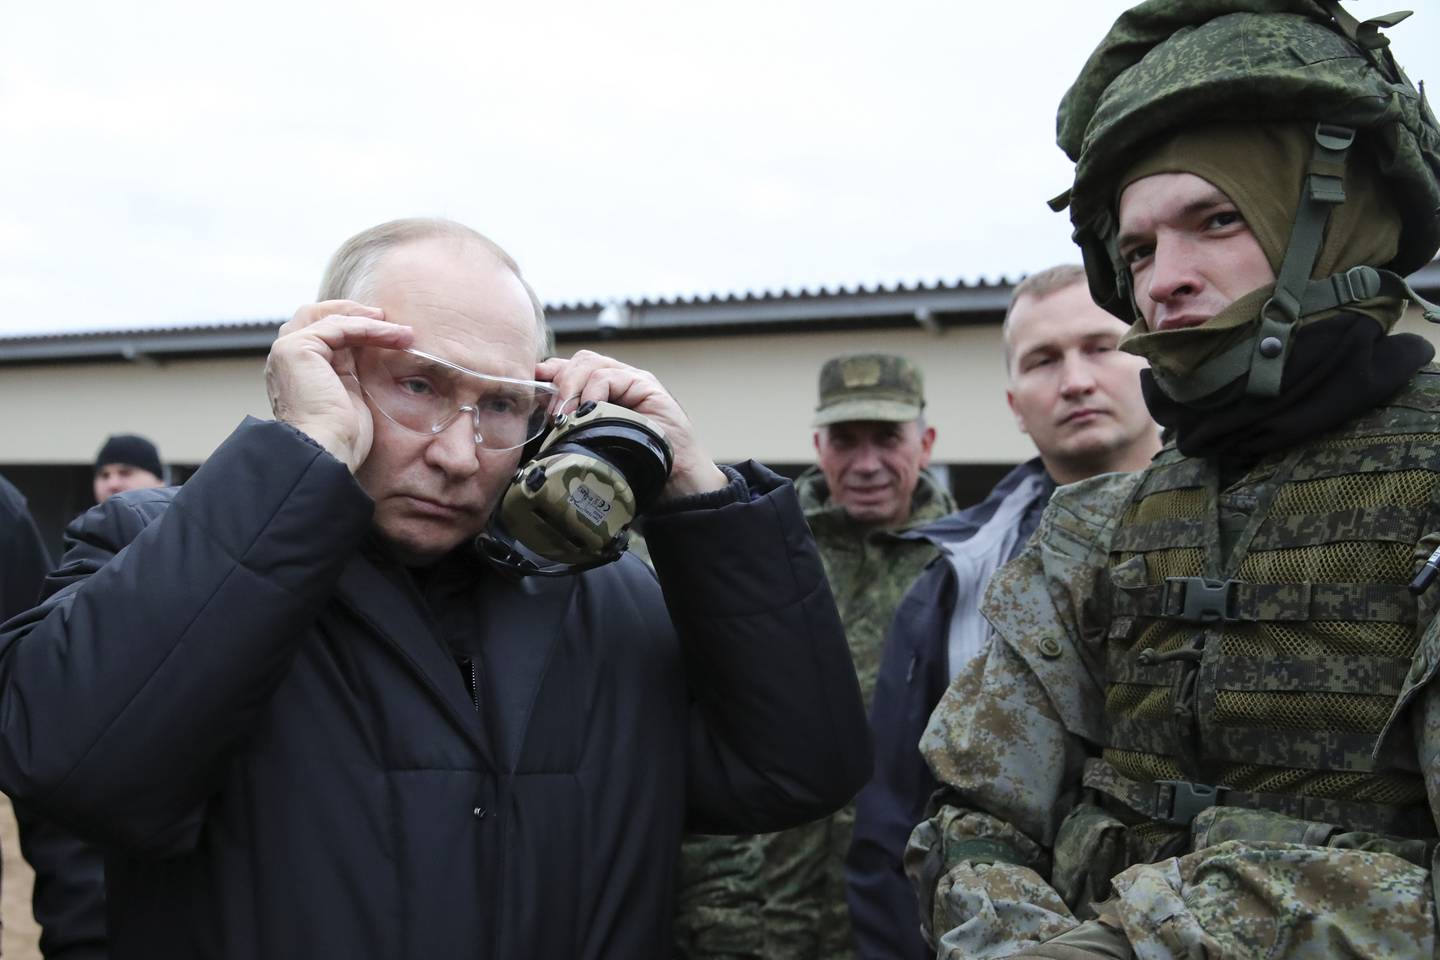 FILE - Russian President Vladimir Putin puts on protective glasses as he visits a military training center of the Western Military District for mobilized reservists in Ryazan Region, Russia, Thursday, Oct. 20, 2022.  (Mikhail Klimentyev, Sputnik, Kremlin Pool Photo via AP, File)